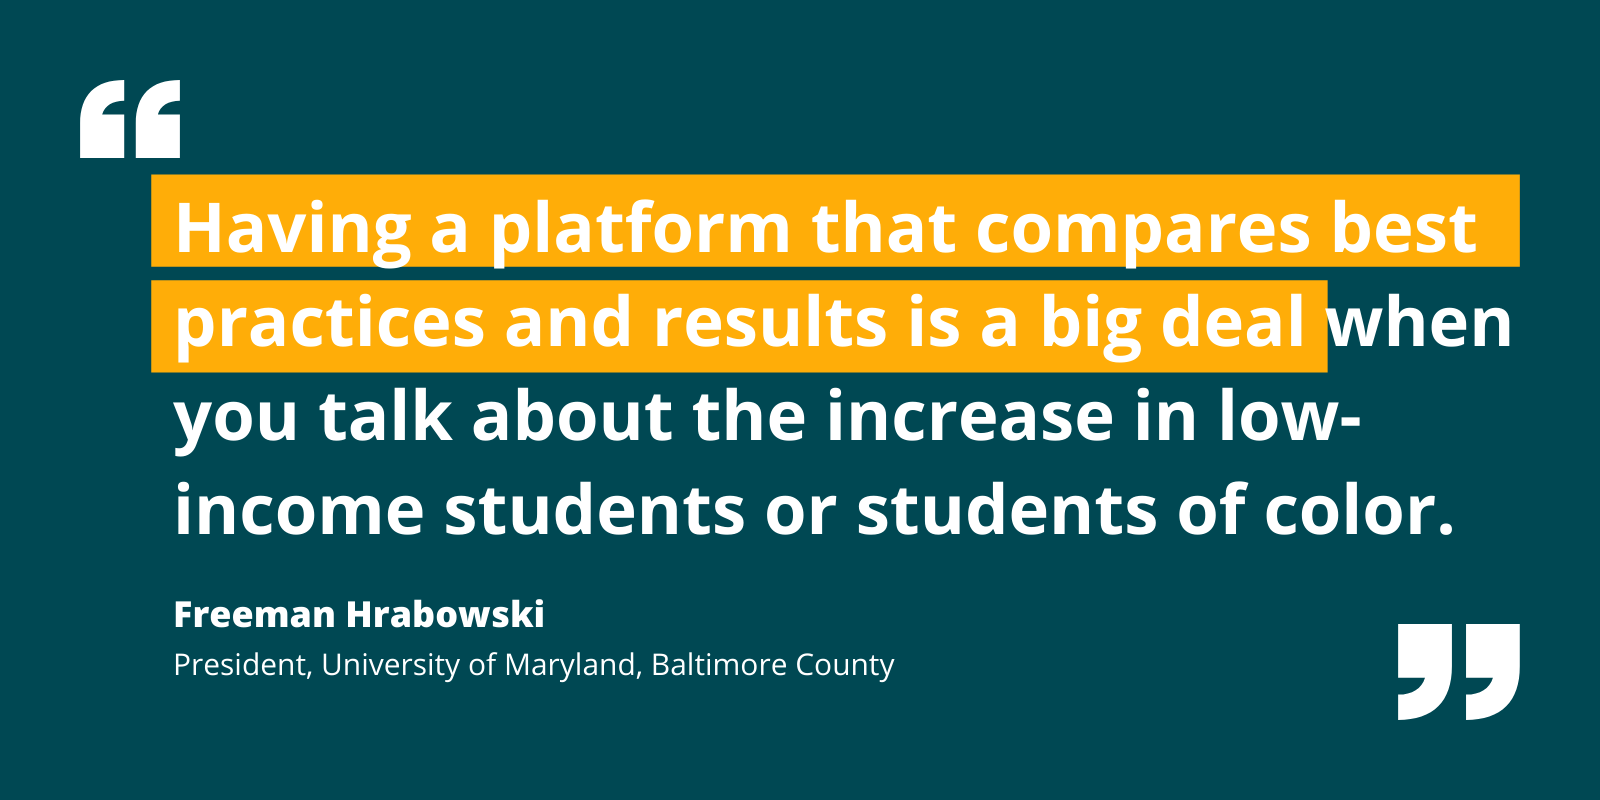 Quote by Freeman Hrabowski re the UIA providing ability to compare outcomes for low-income students or students of color.